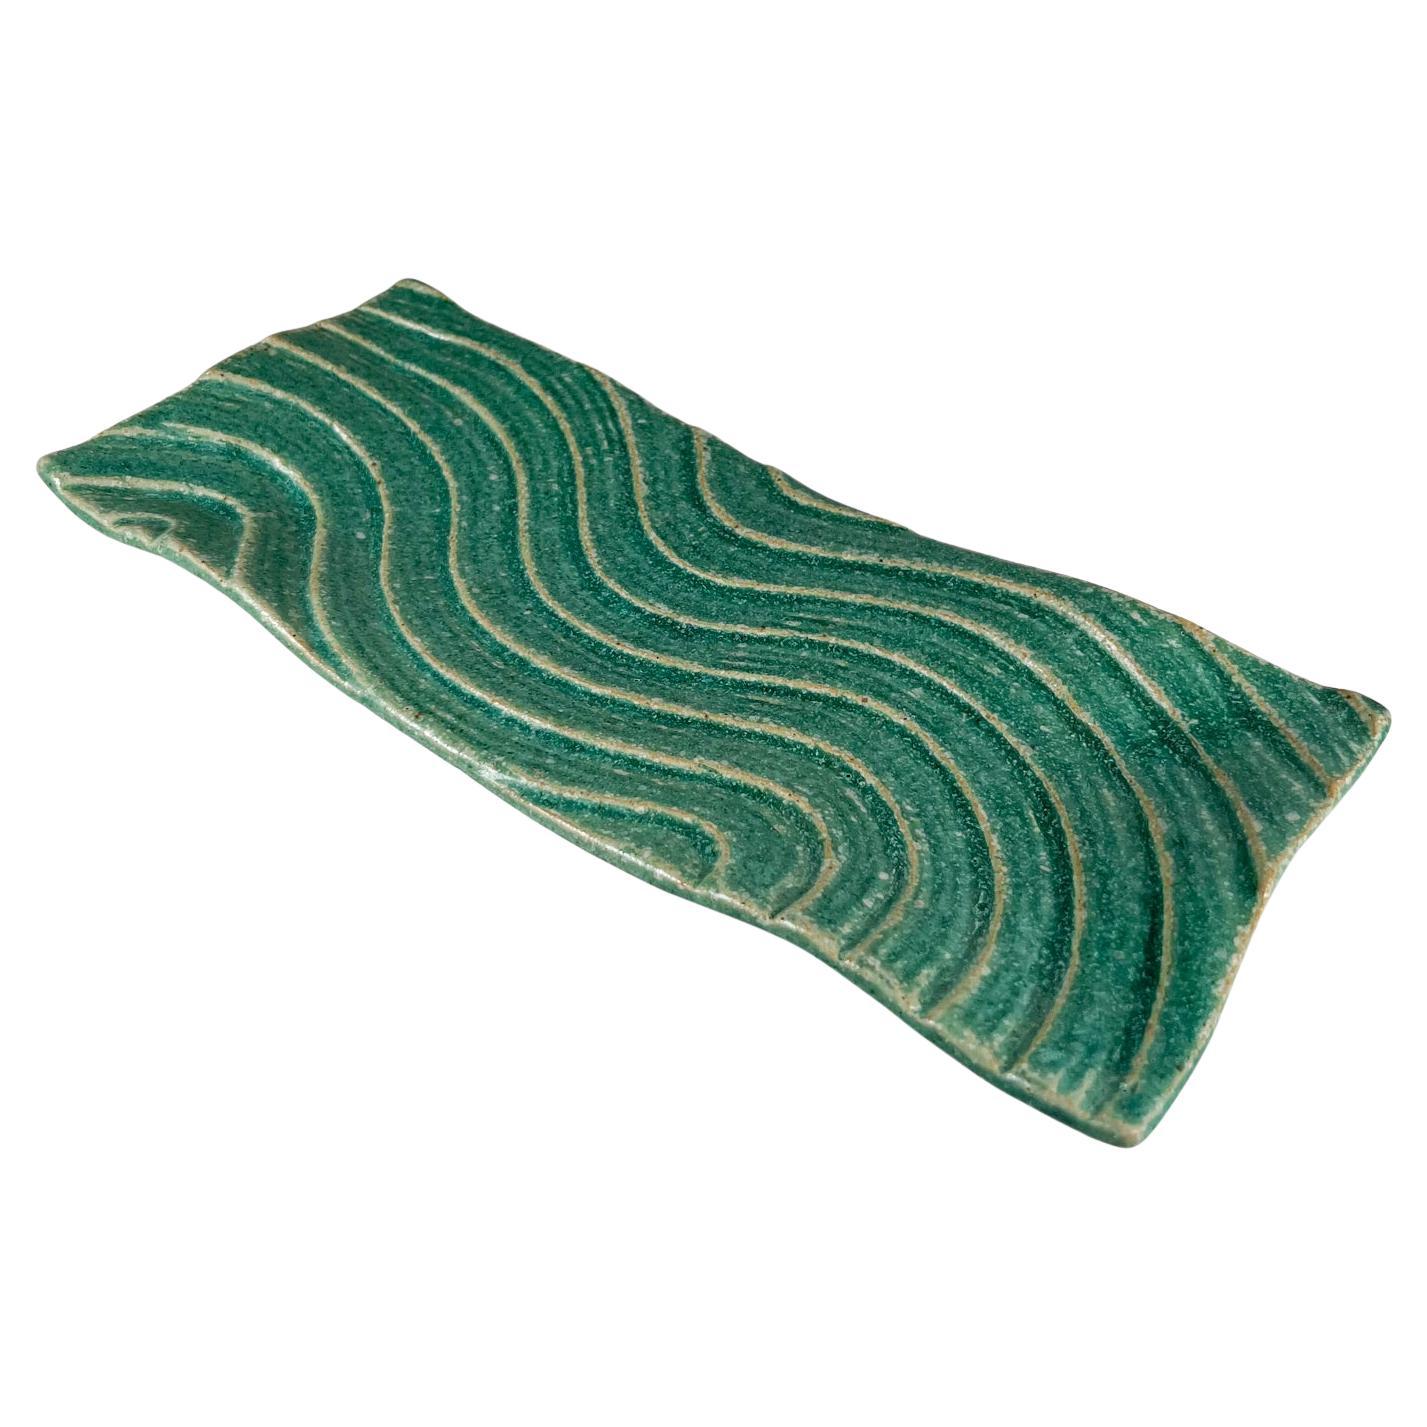 1970s Sculptural Green Wave Dish Studio Pottery Art Ed Thompson For Sale